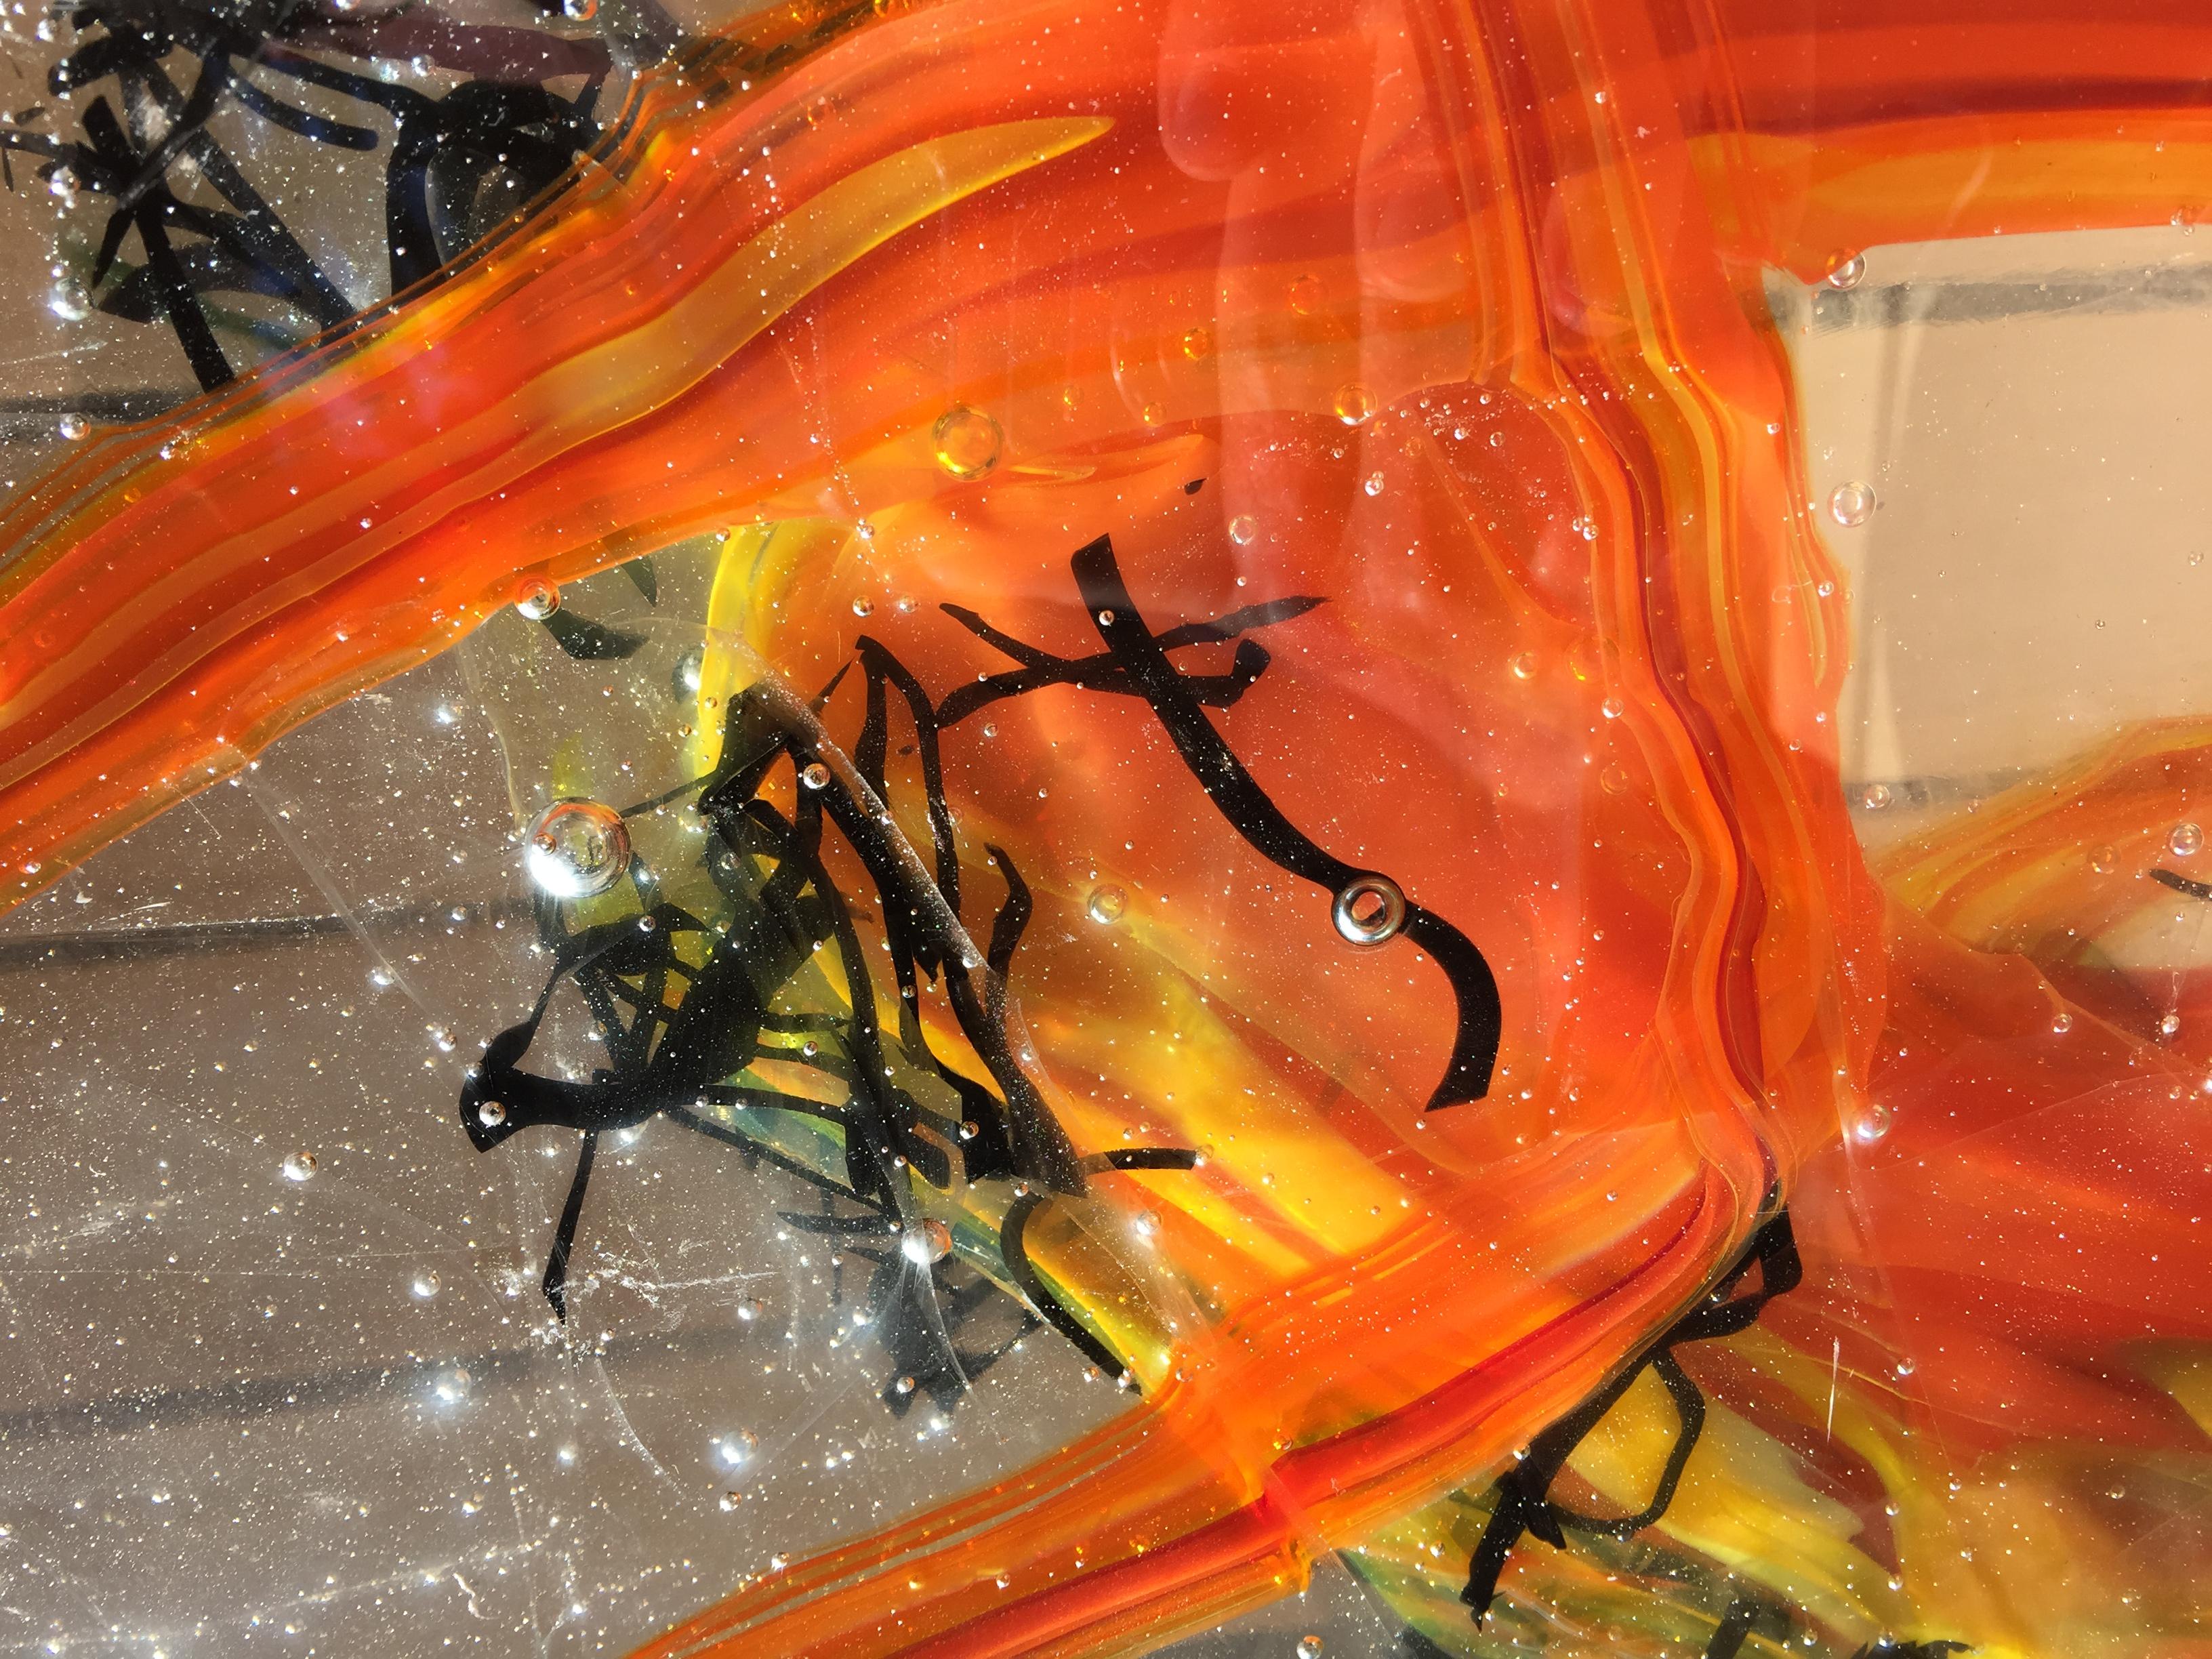 'Gaji' is a contemporary abstract cast glass sculpture by David Ruth from his Internal Space series. It features painterly brushstroke formations in glass called trails. These trails of orange and black are created through rolling molten glass into